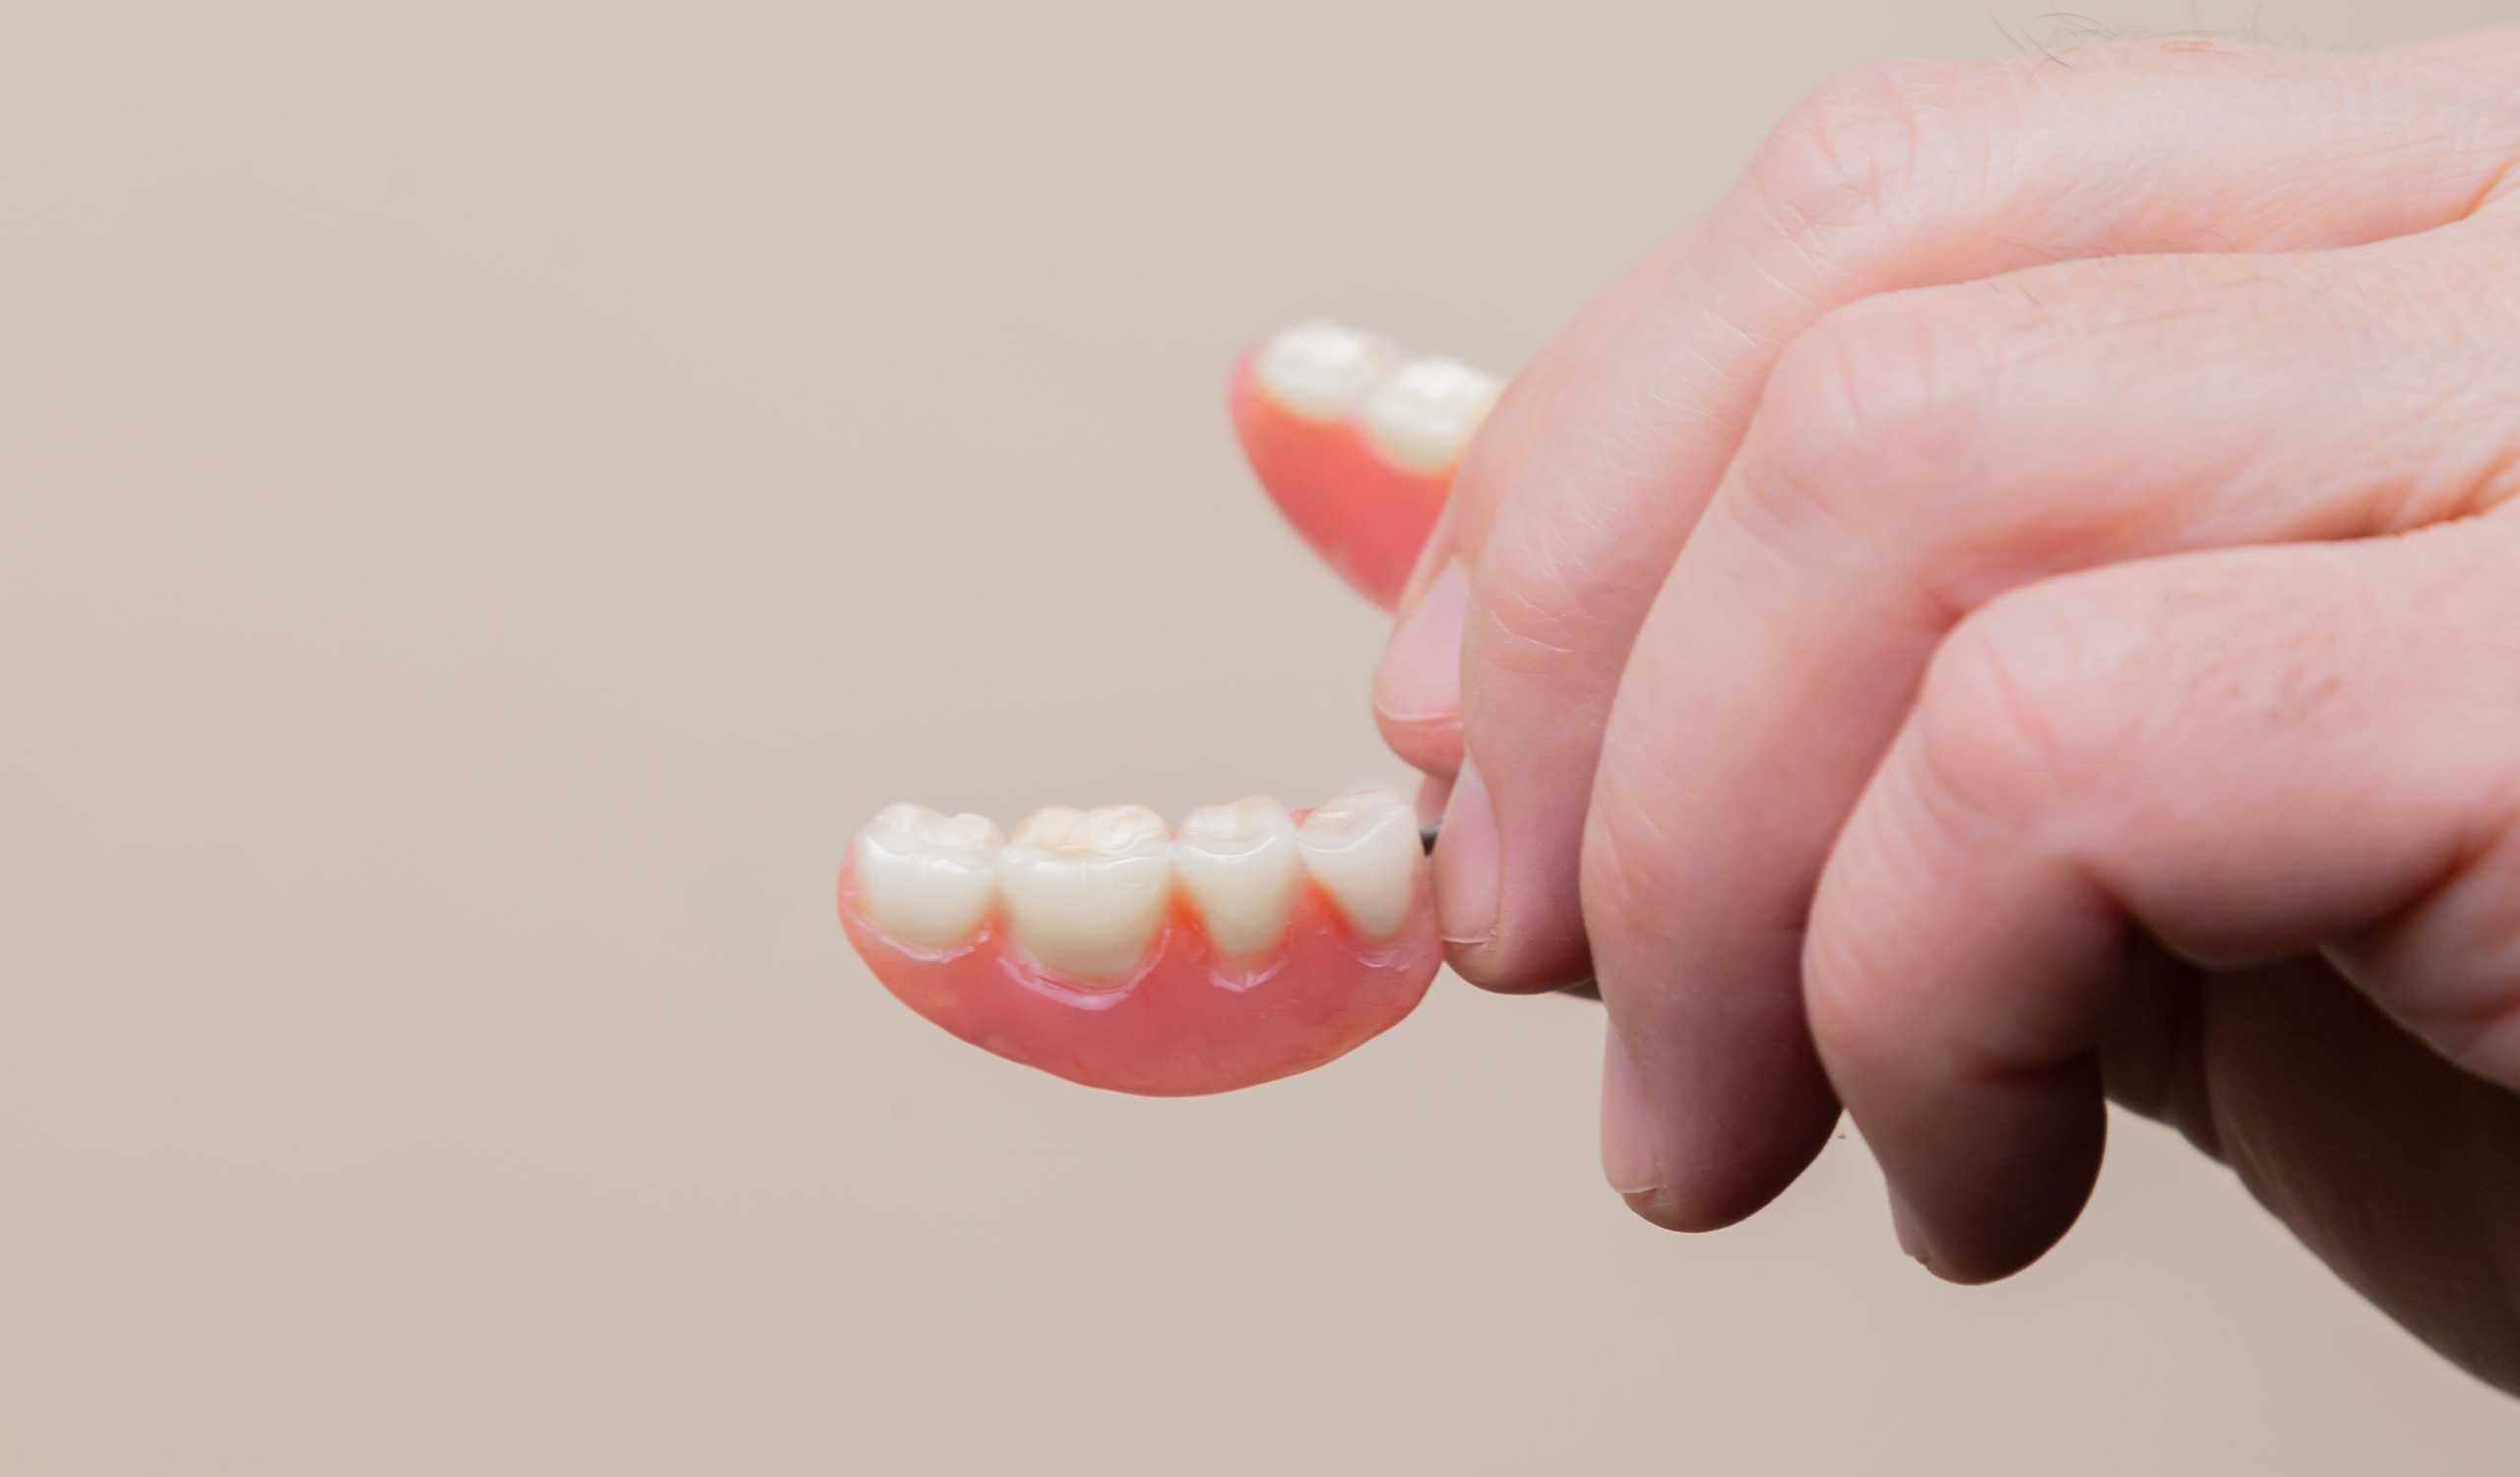 blog post dentures and transplants what is covered by the insurance b06f47fa